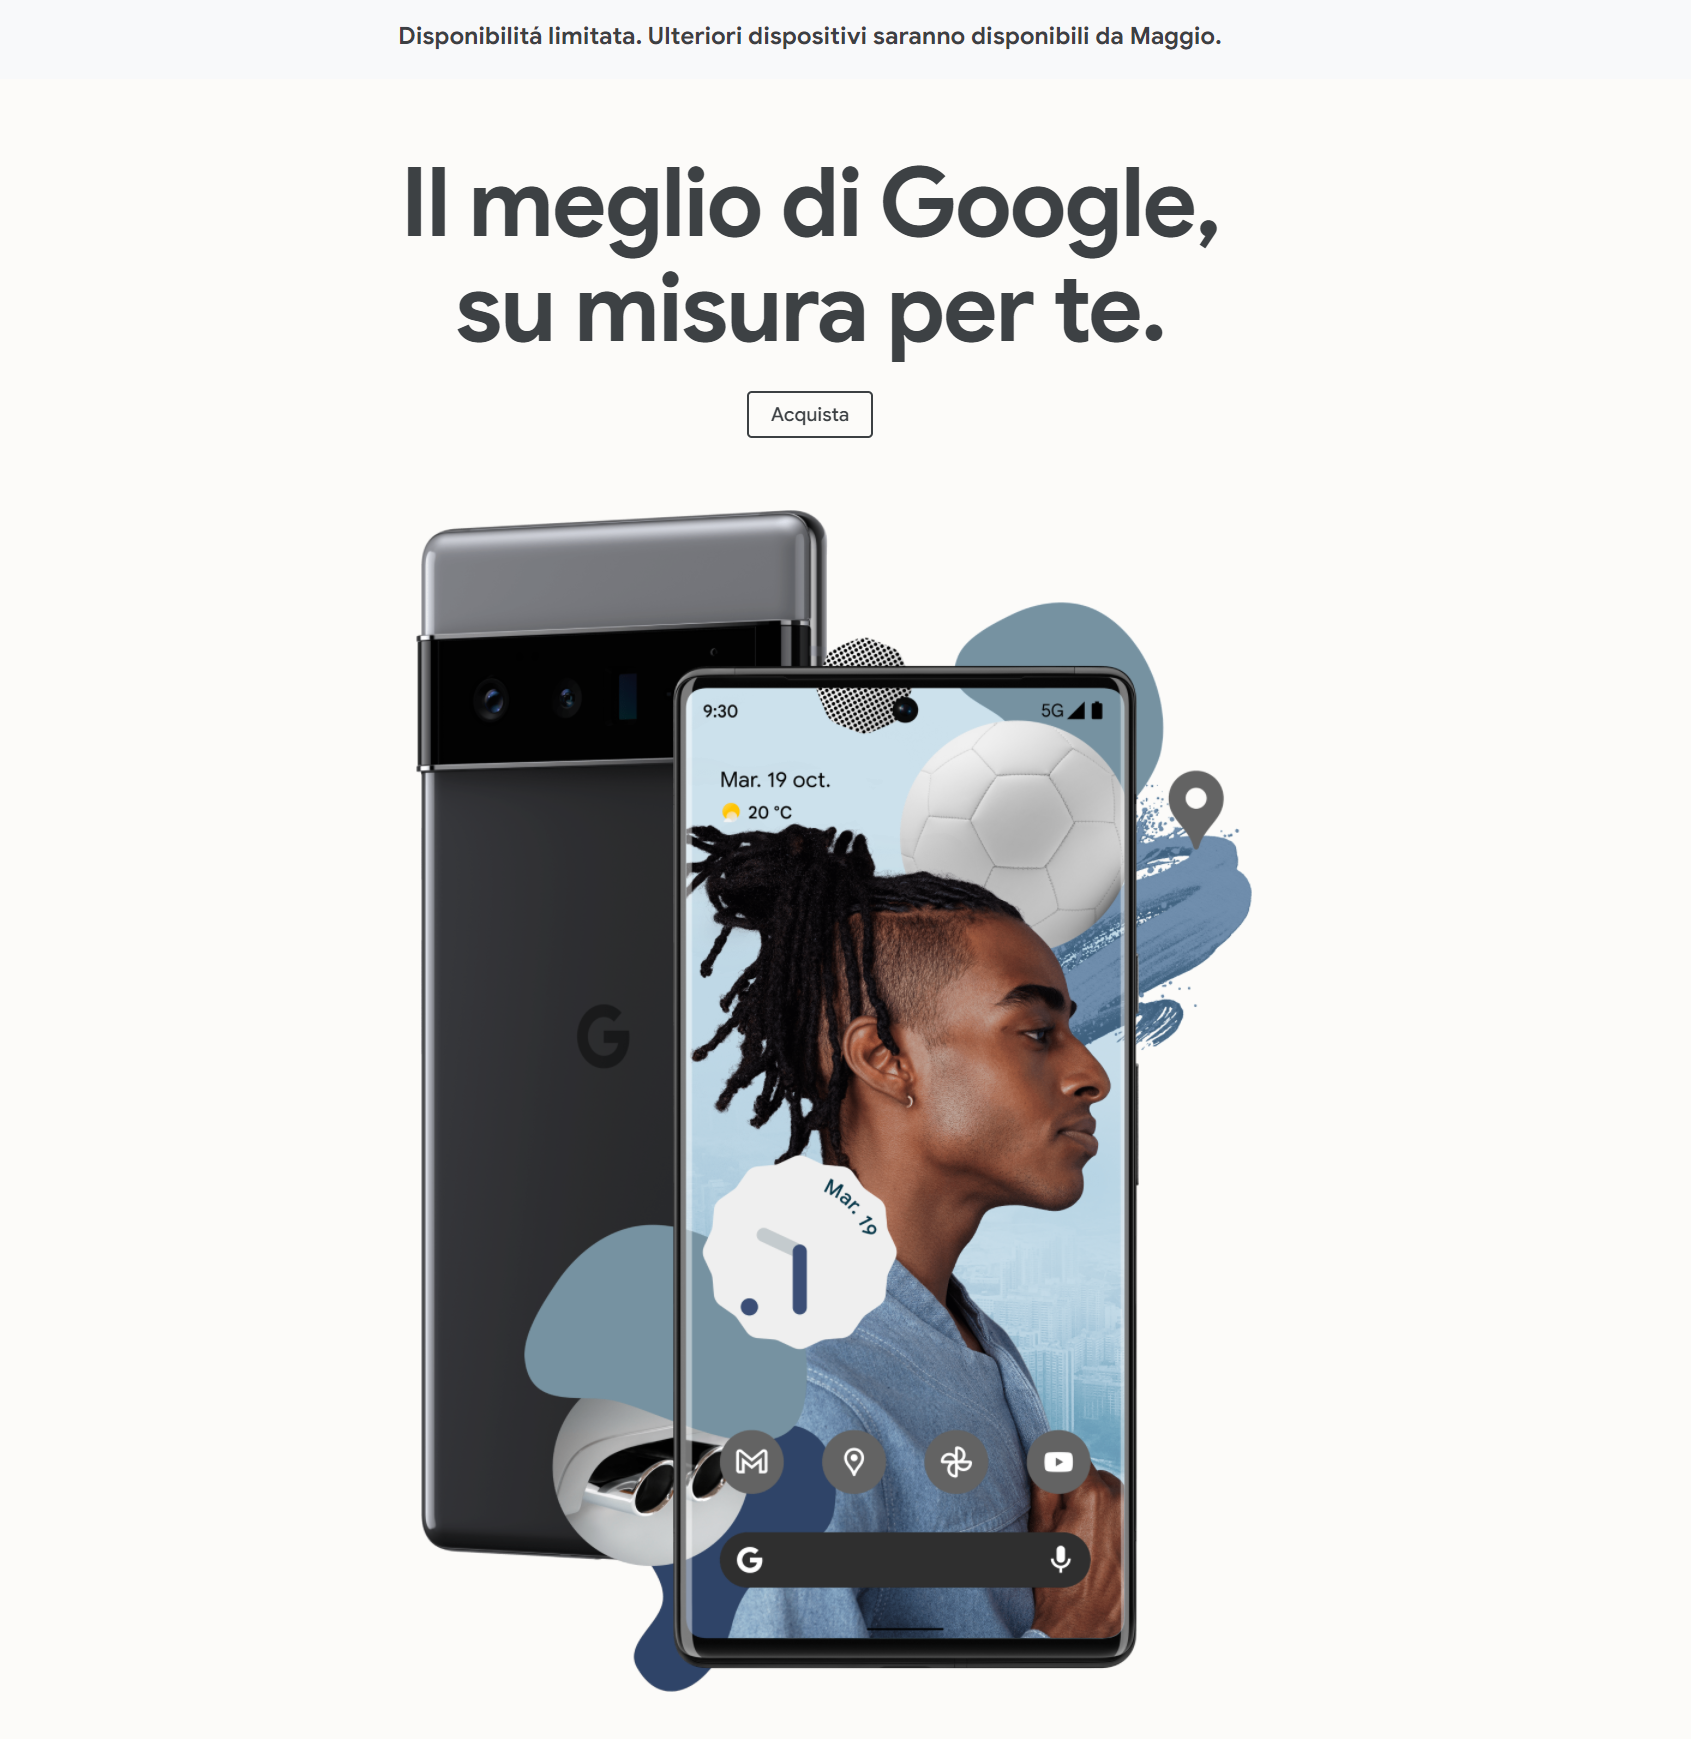 Google Store listing for Pixel 6 Pro in Italy